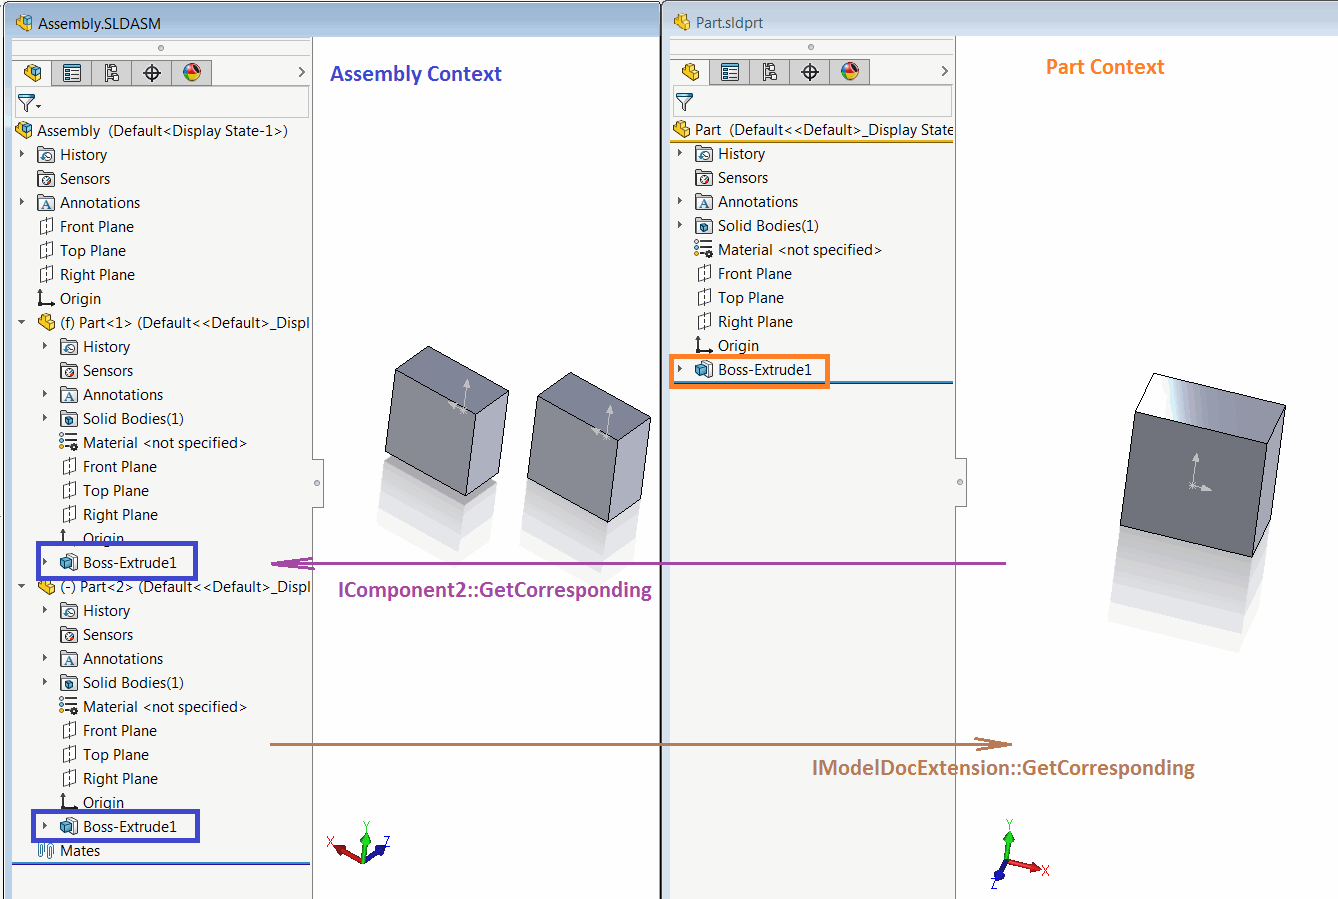 Assembly and Model contexts